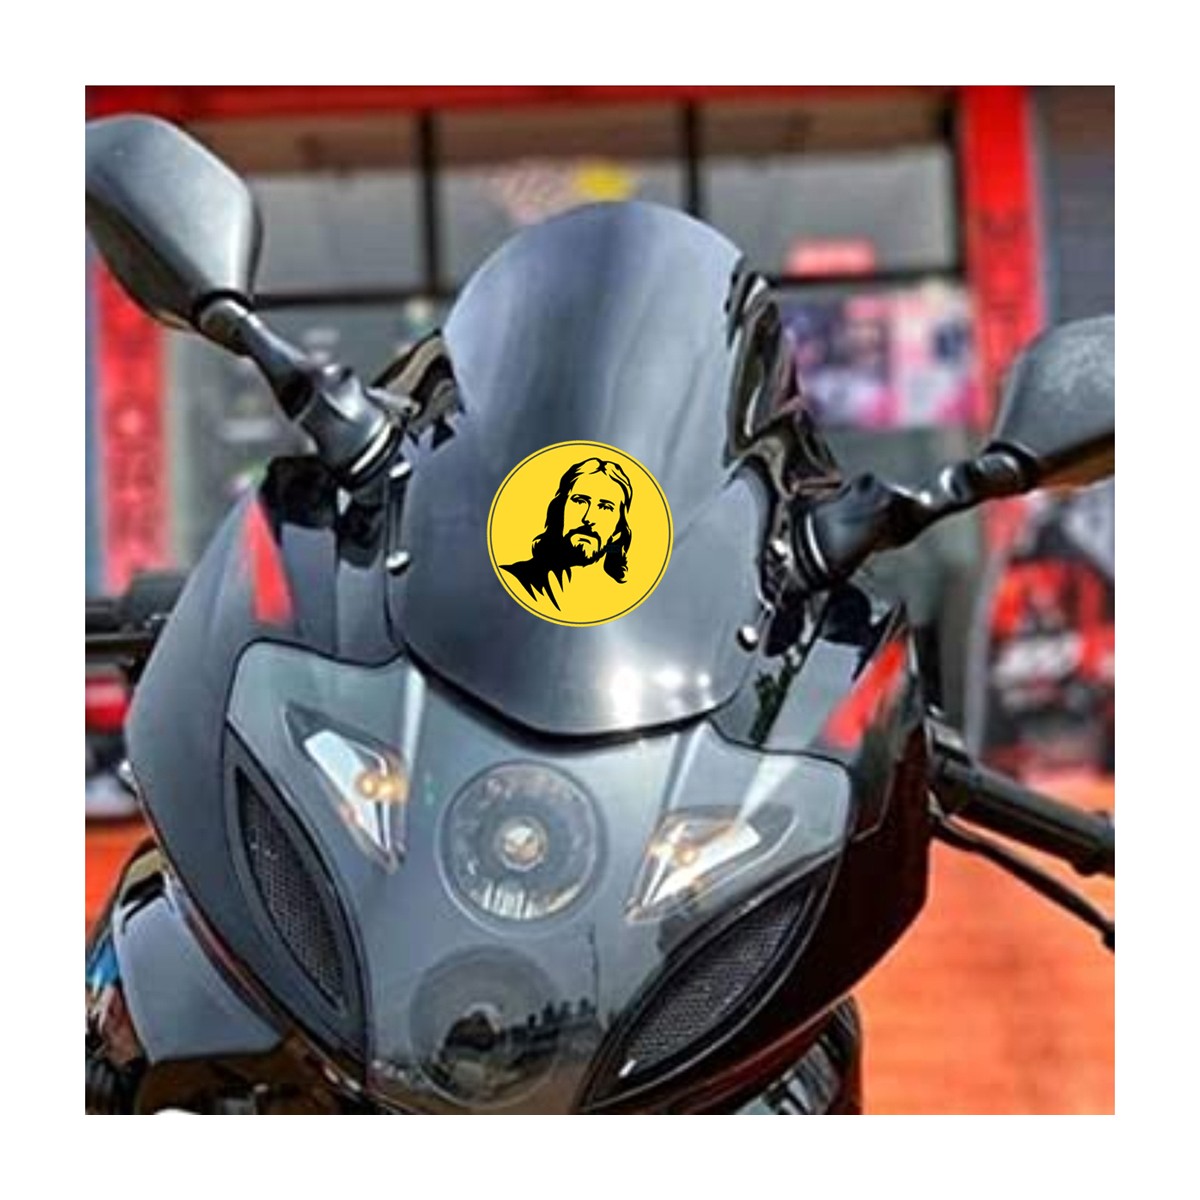 Name and Number stickers for Bajaj Motorcycles.